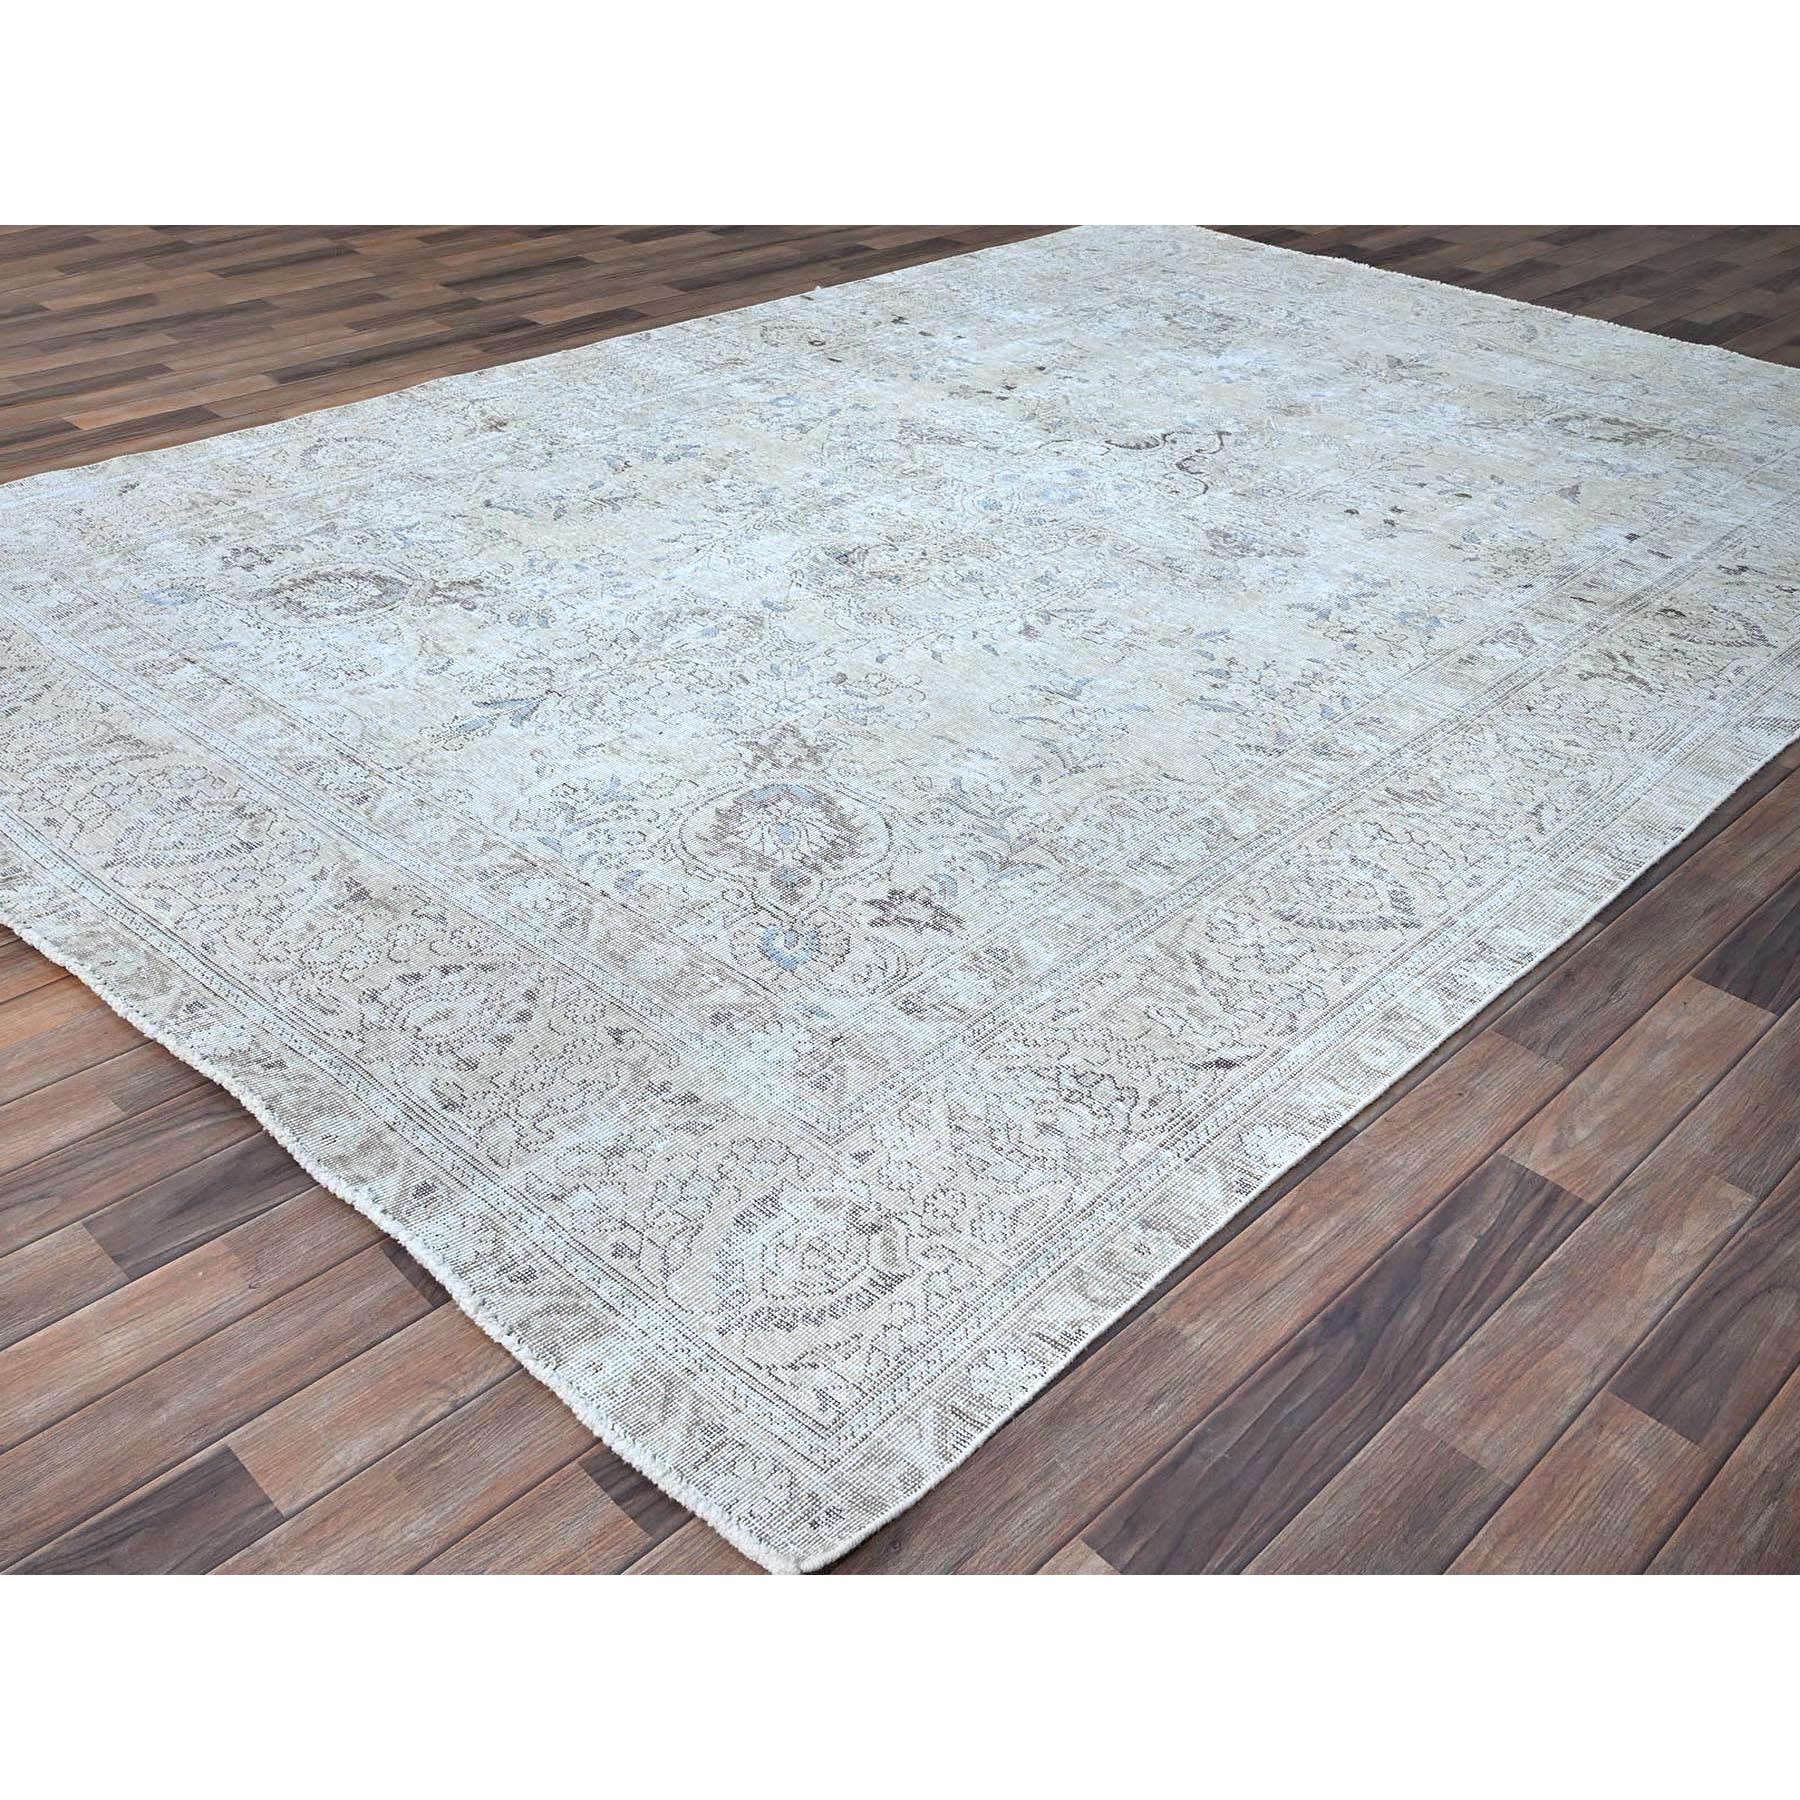 Ivory Vintage Persian Tabriz Hand Knotted Abrash Evenly Worn Pure Wool Clean Rug In Good Condition For Sale In Carlstadt, NJ